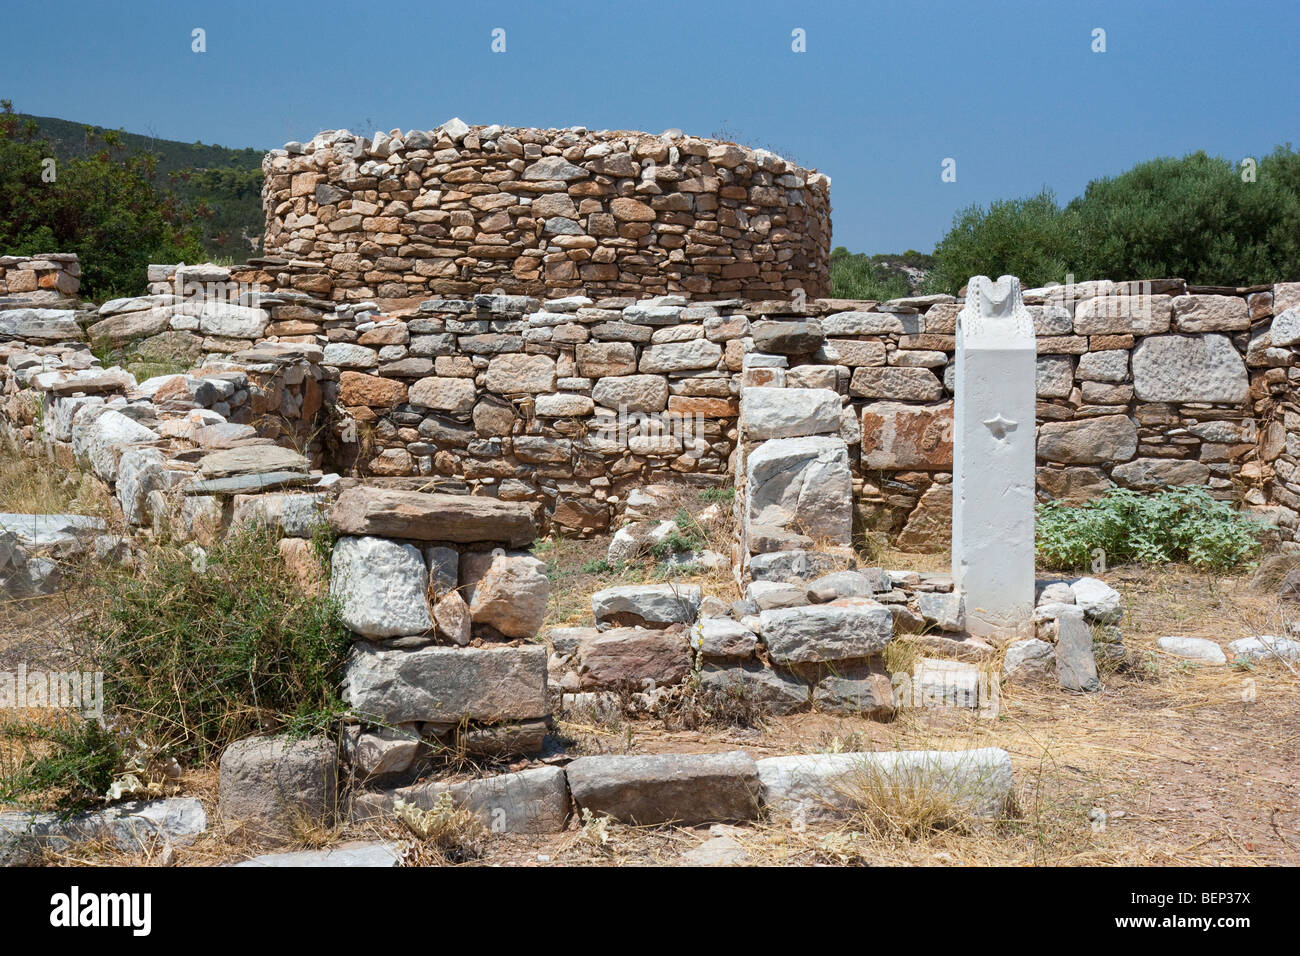 A herm stands in situ in the residential area of Rhamnous, Greece. Stock Photo